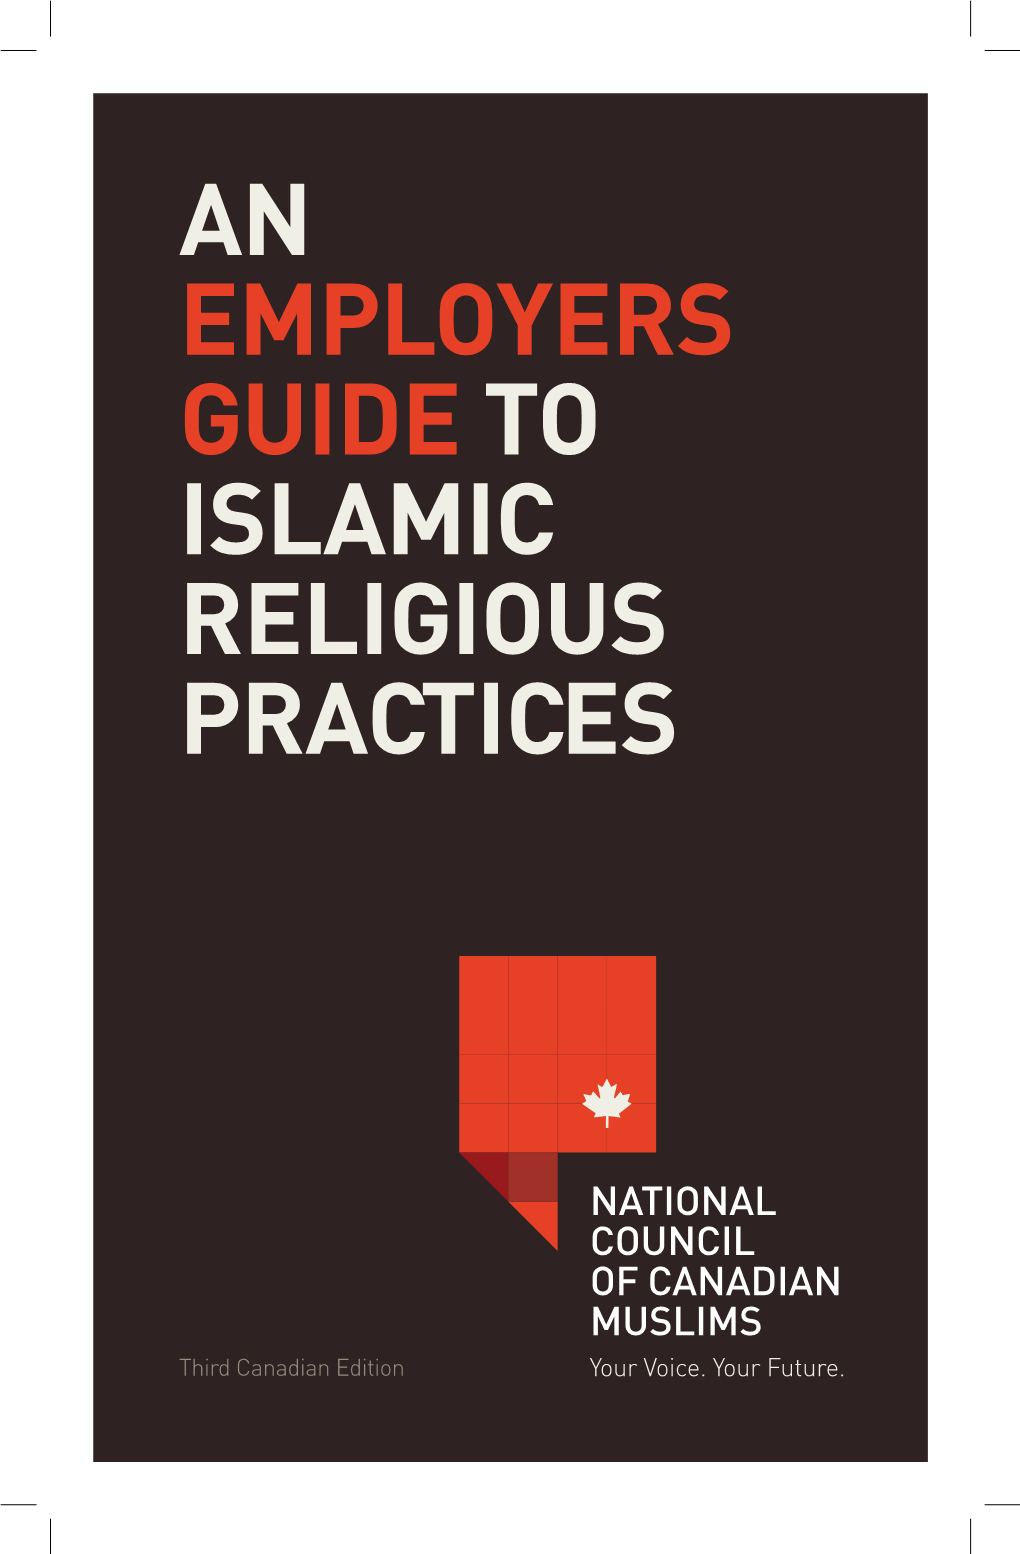 An Employers Guide to Islamic Religious Practices